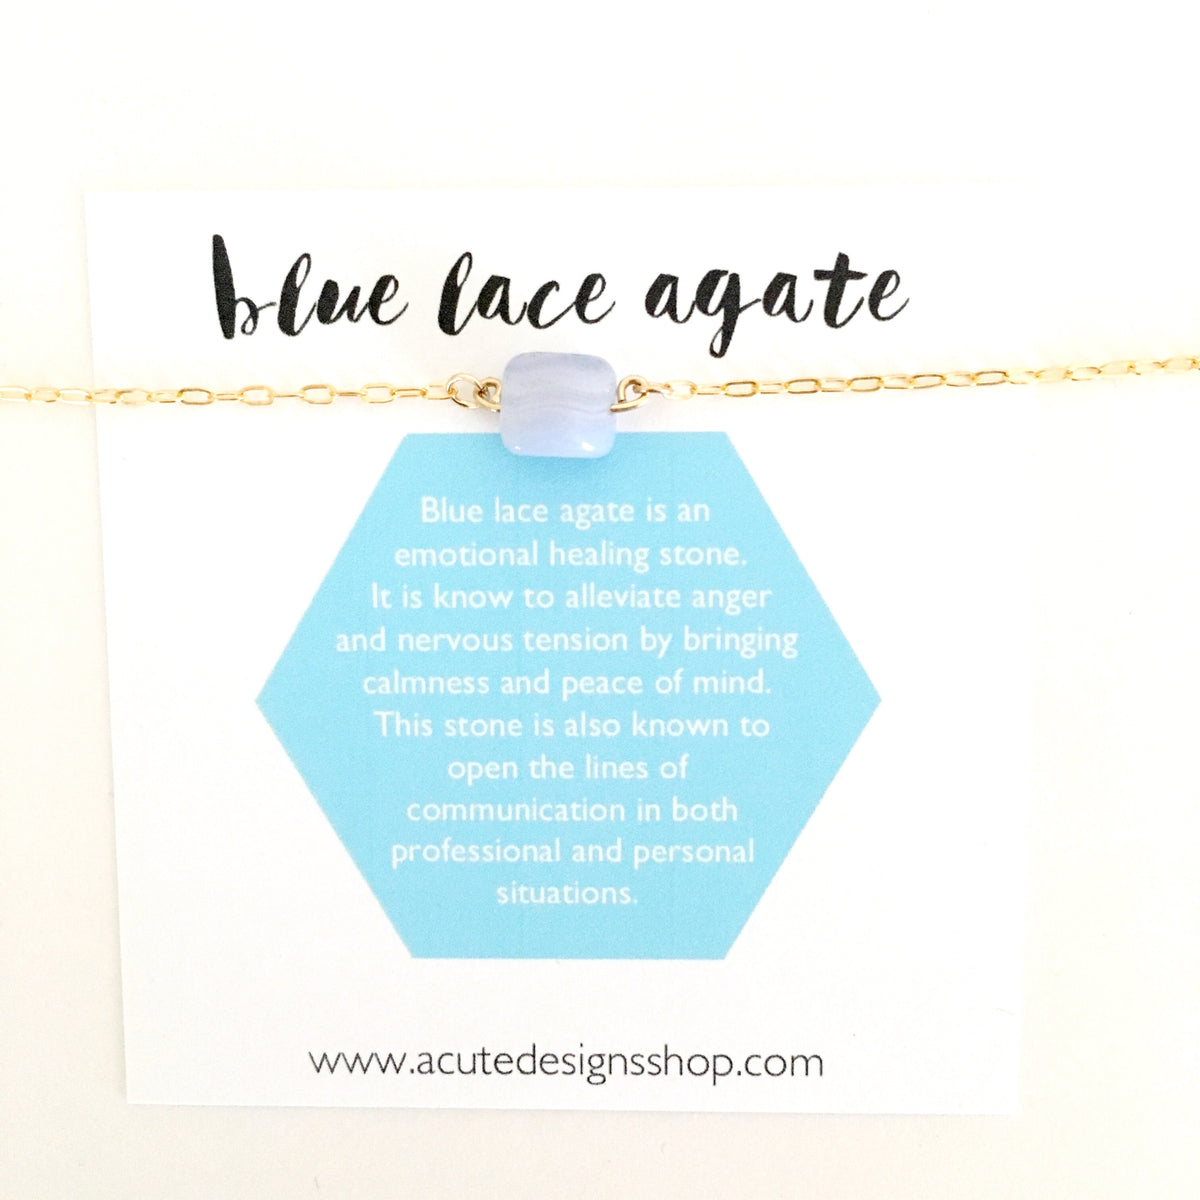 blue lace agate healing